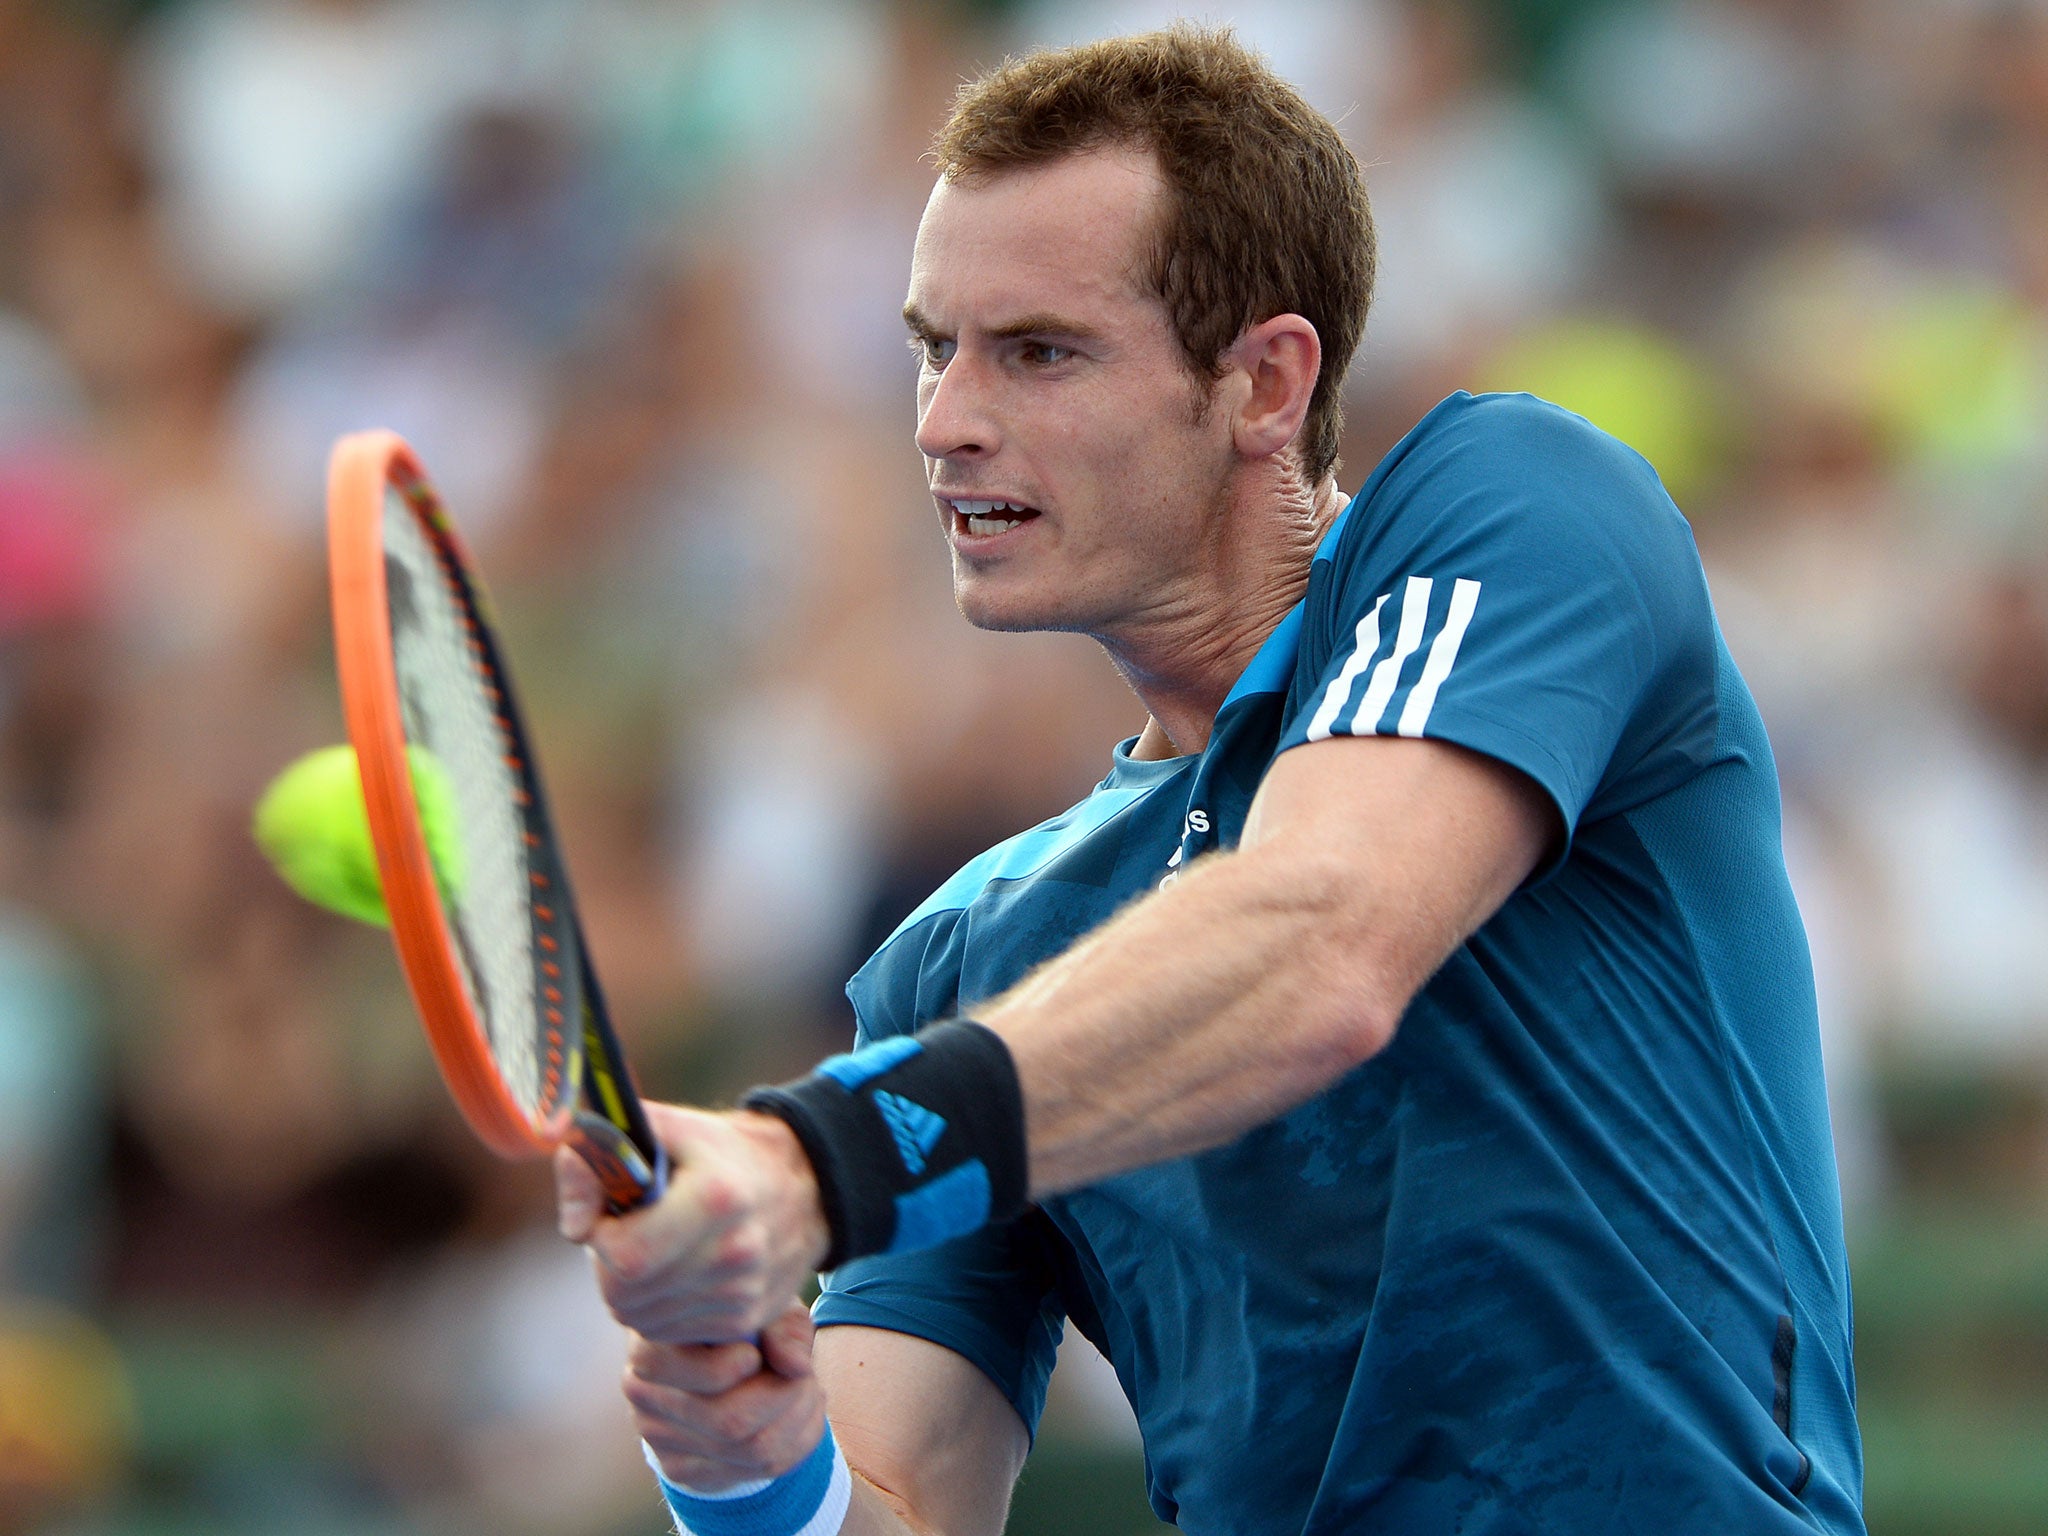 Andy Murray will face Go Saeda of Japan in the first round of the Australian Open.